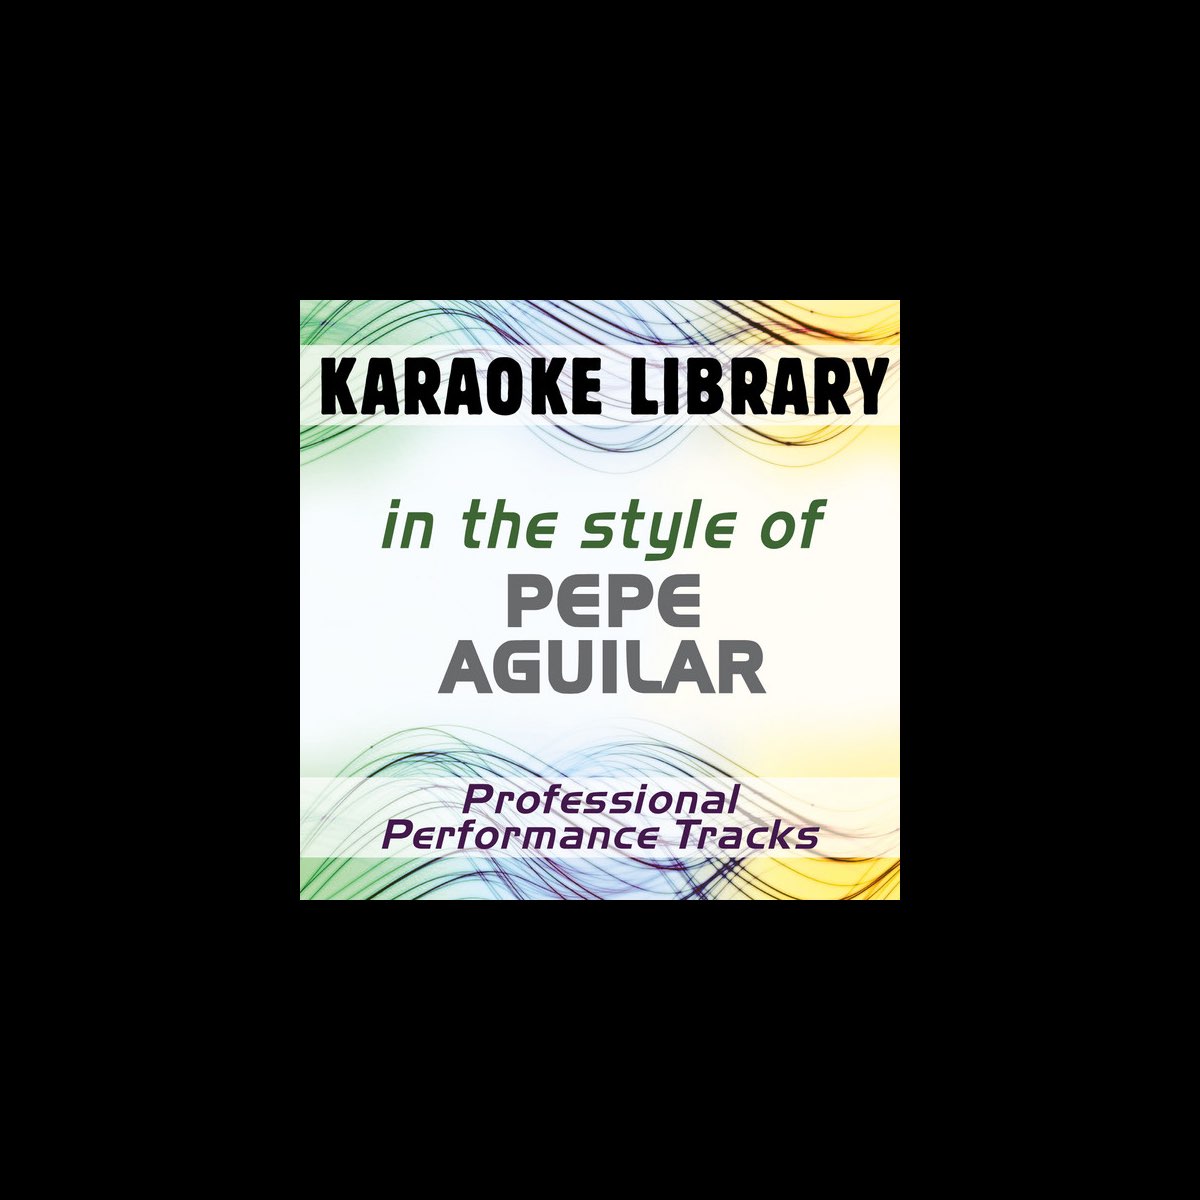 In the Style of Pepe Aguilar (Karaoke - Professional Performance Tracks) by  Karaoke Library on Apple Music